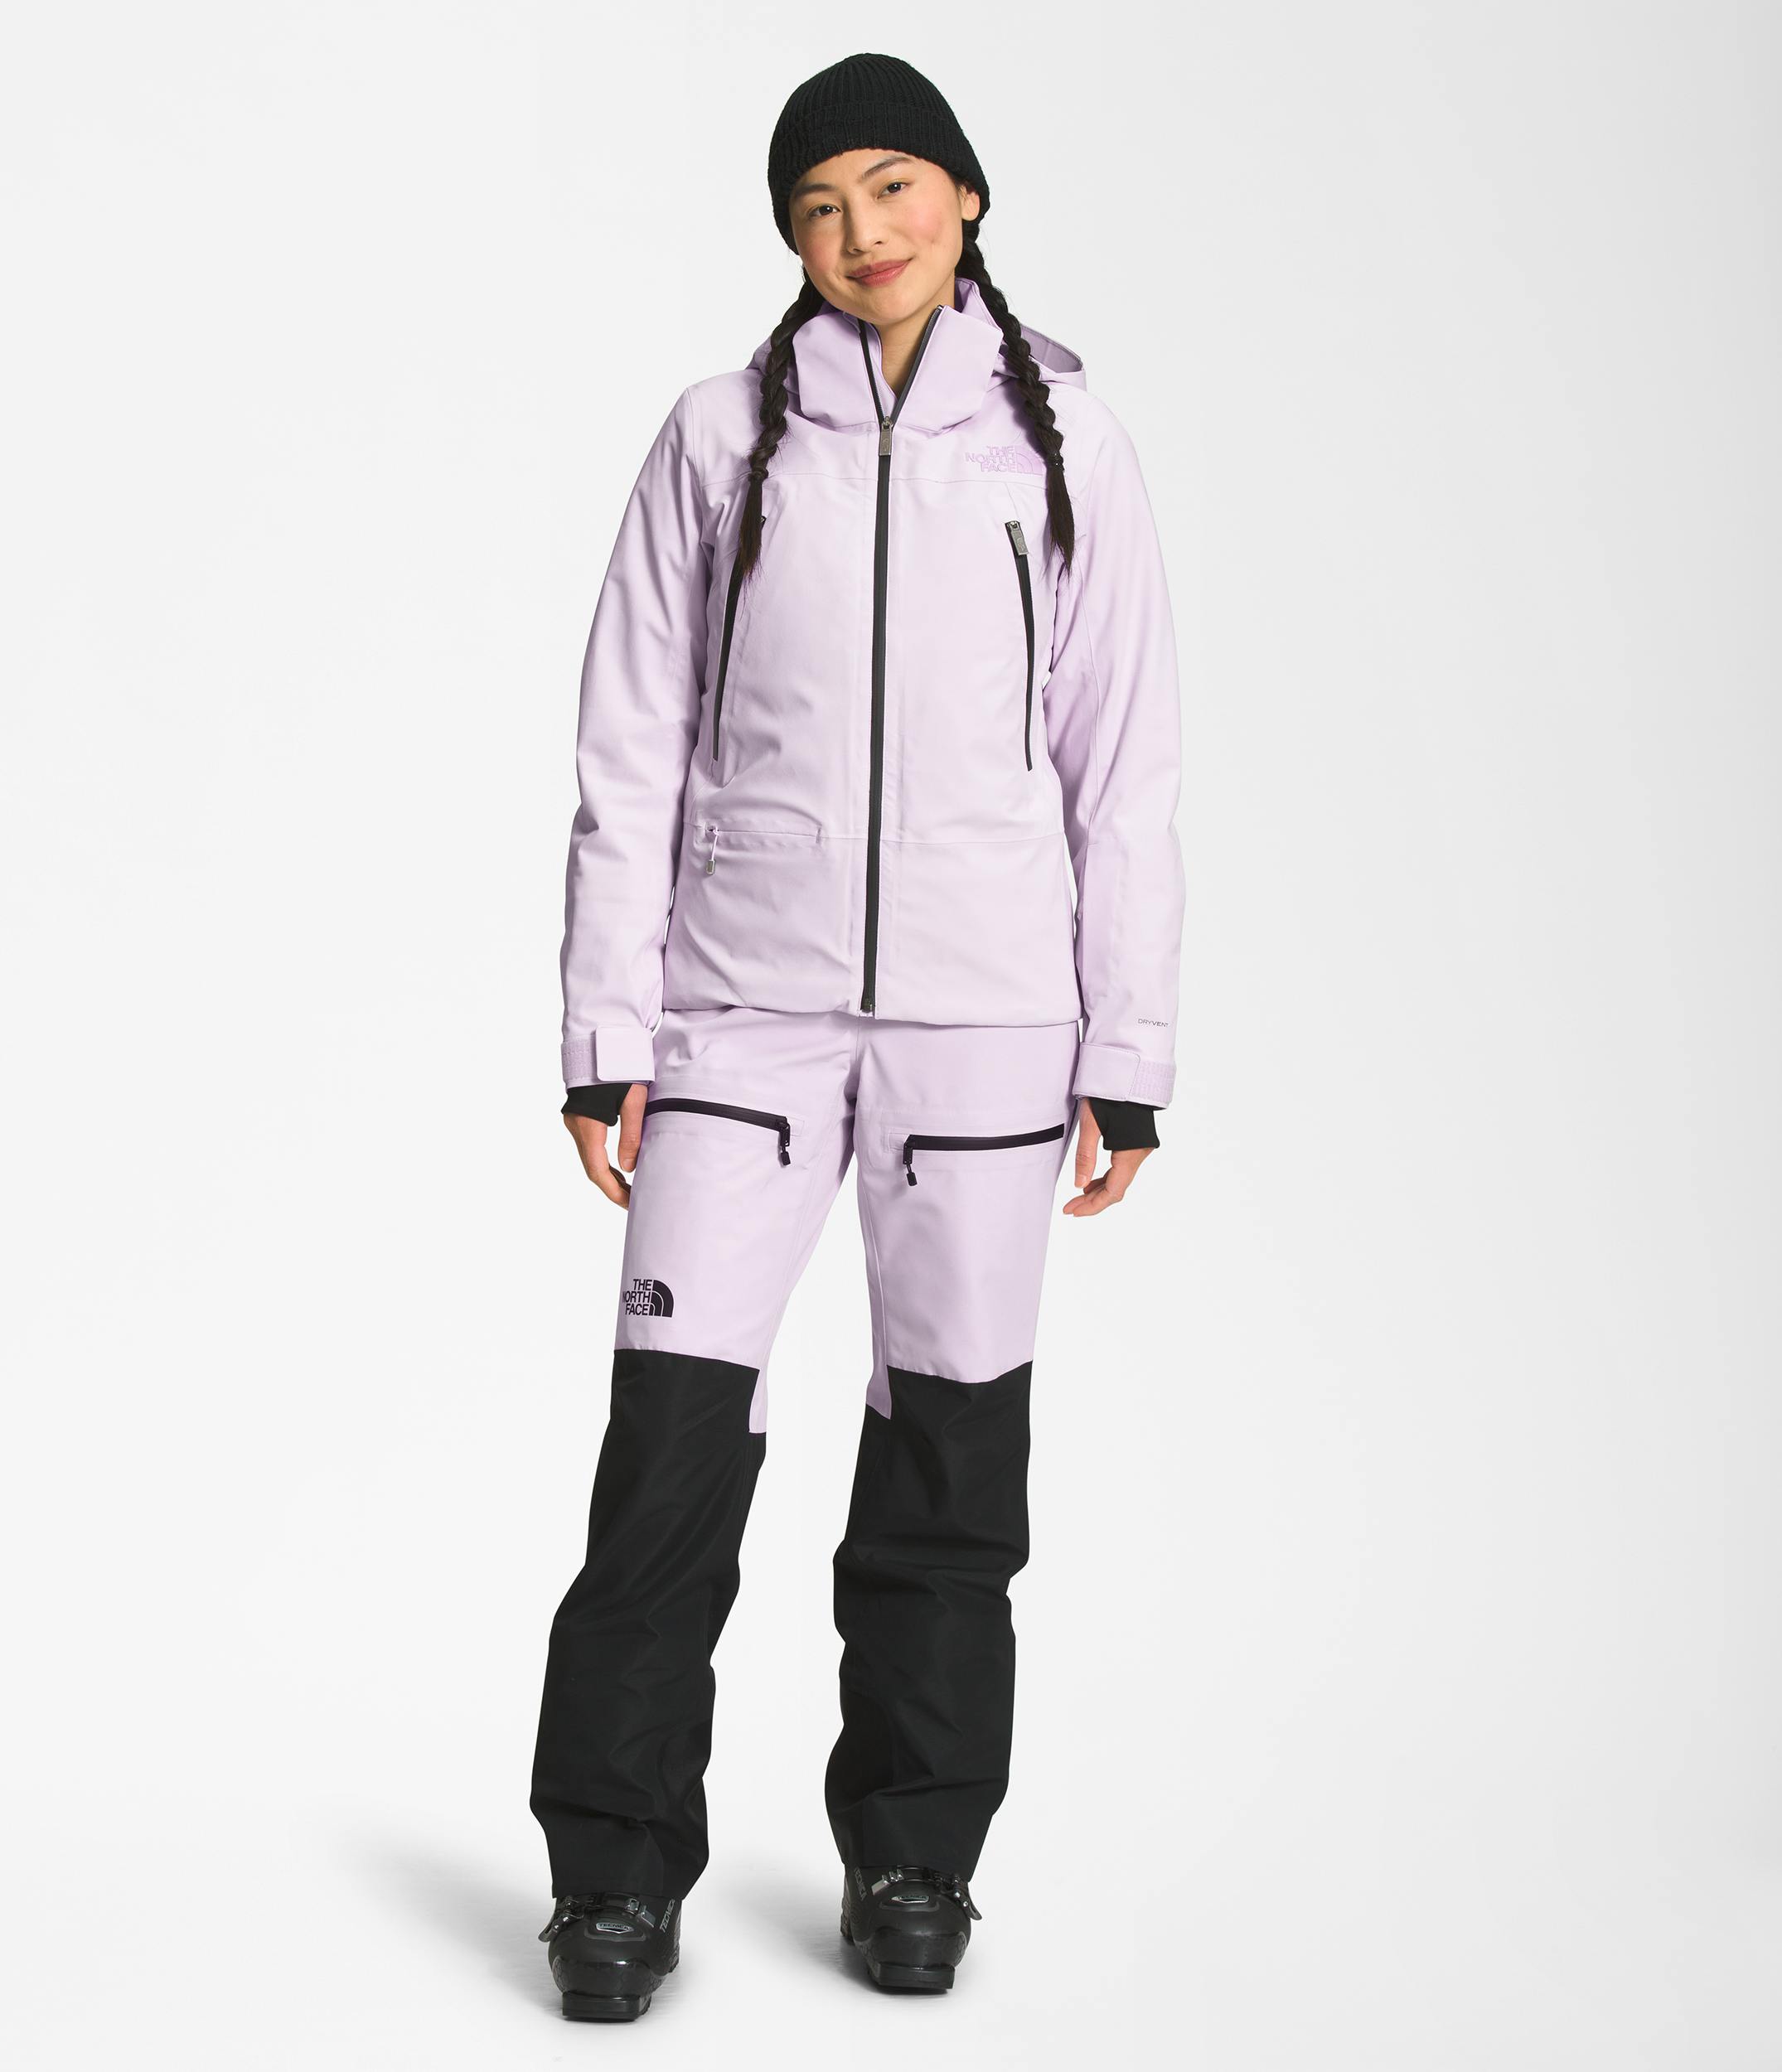 The North Face Women's Lenado 2L Insulated Jacket